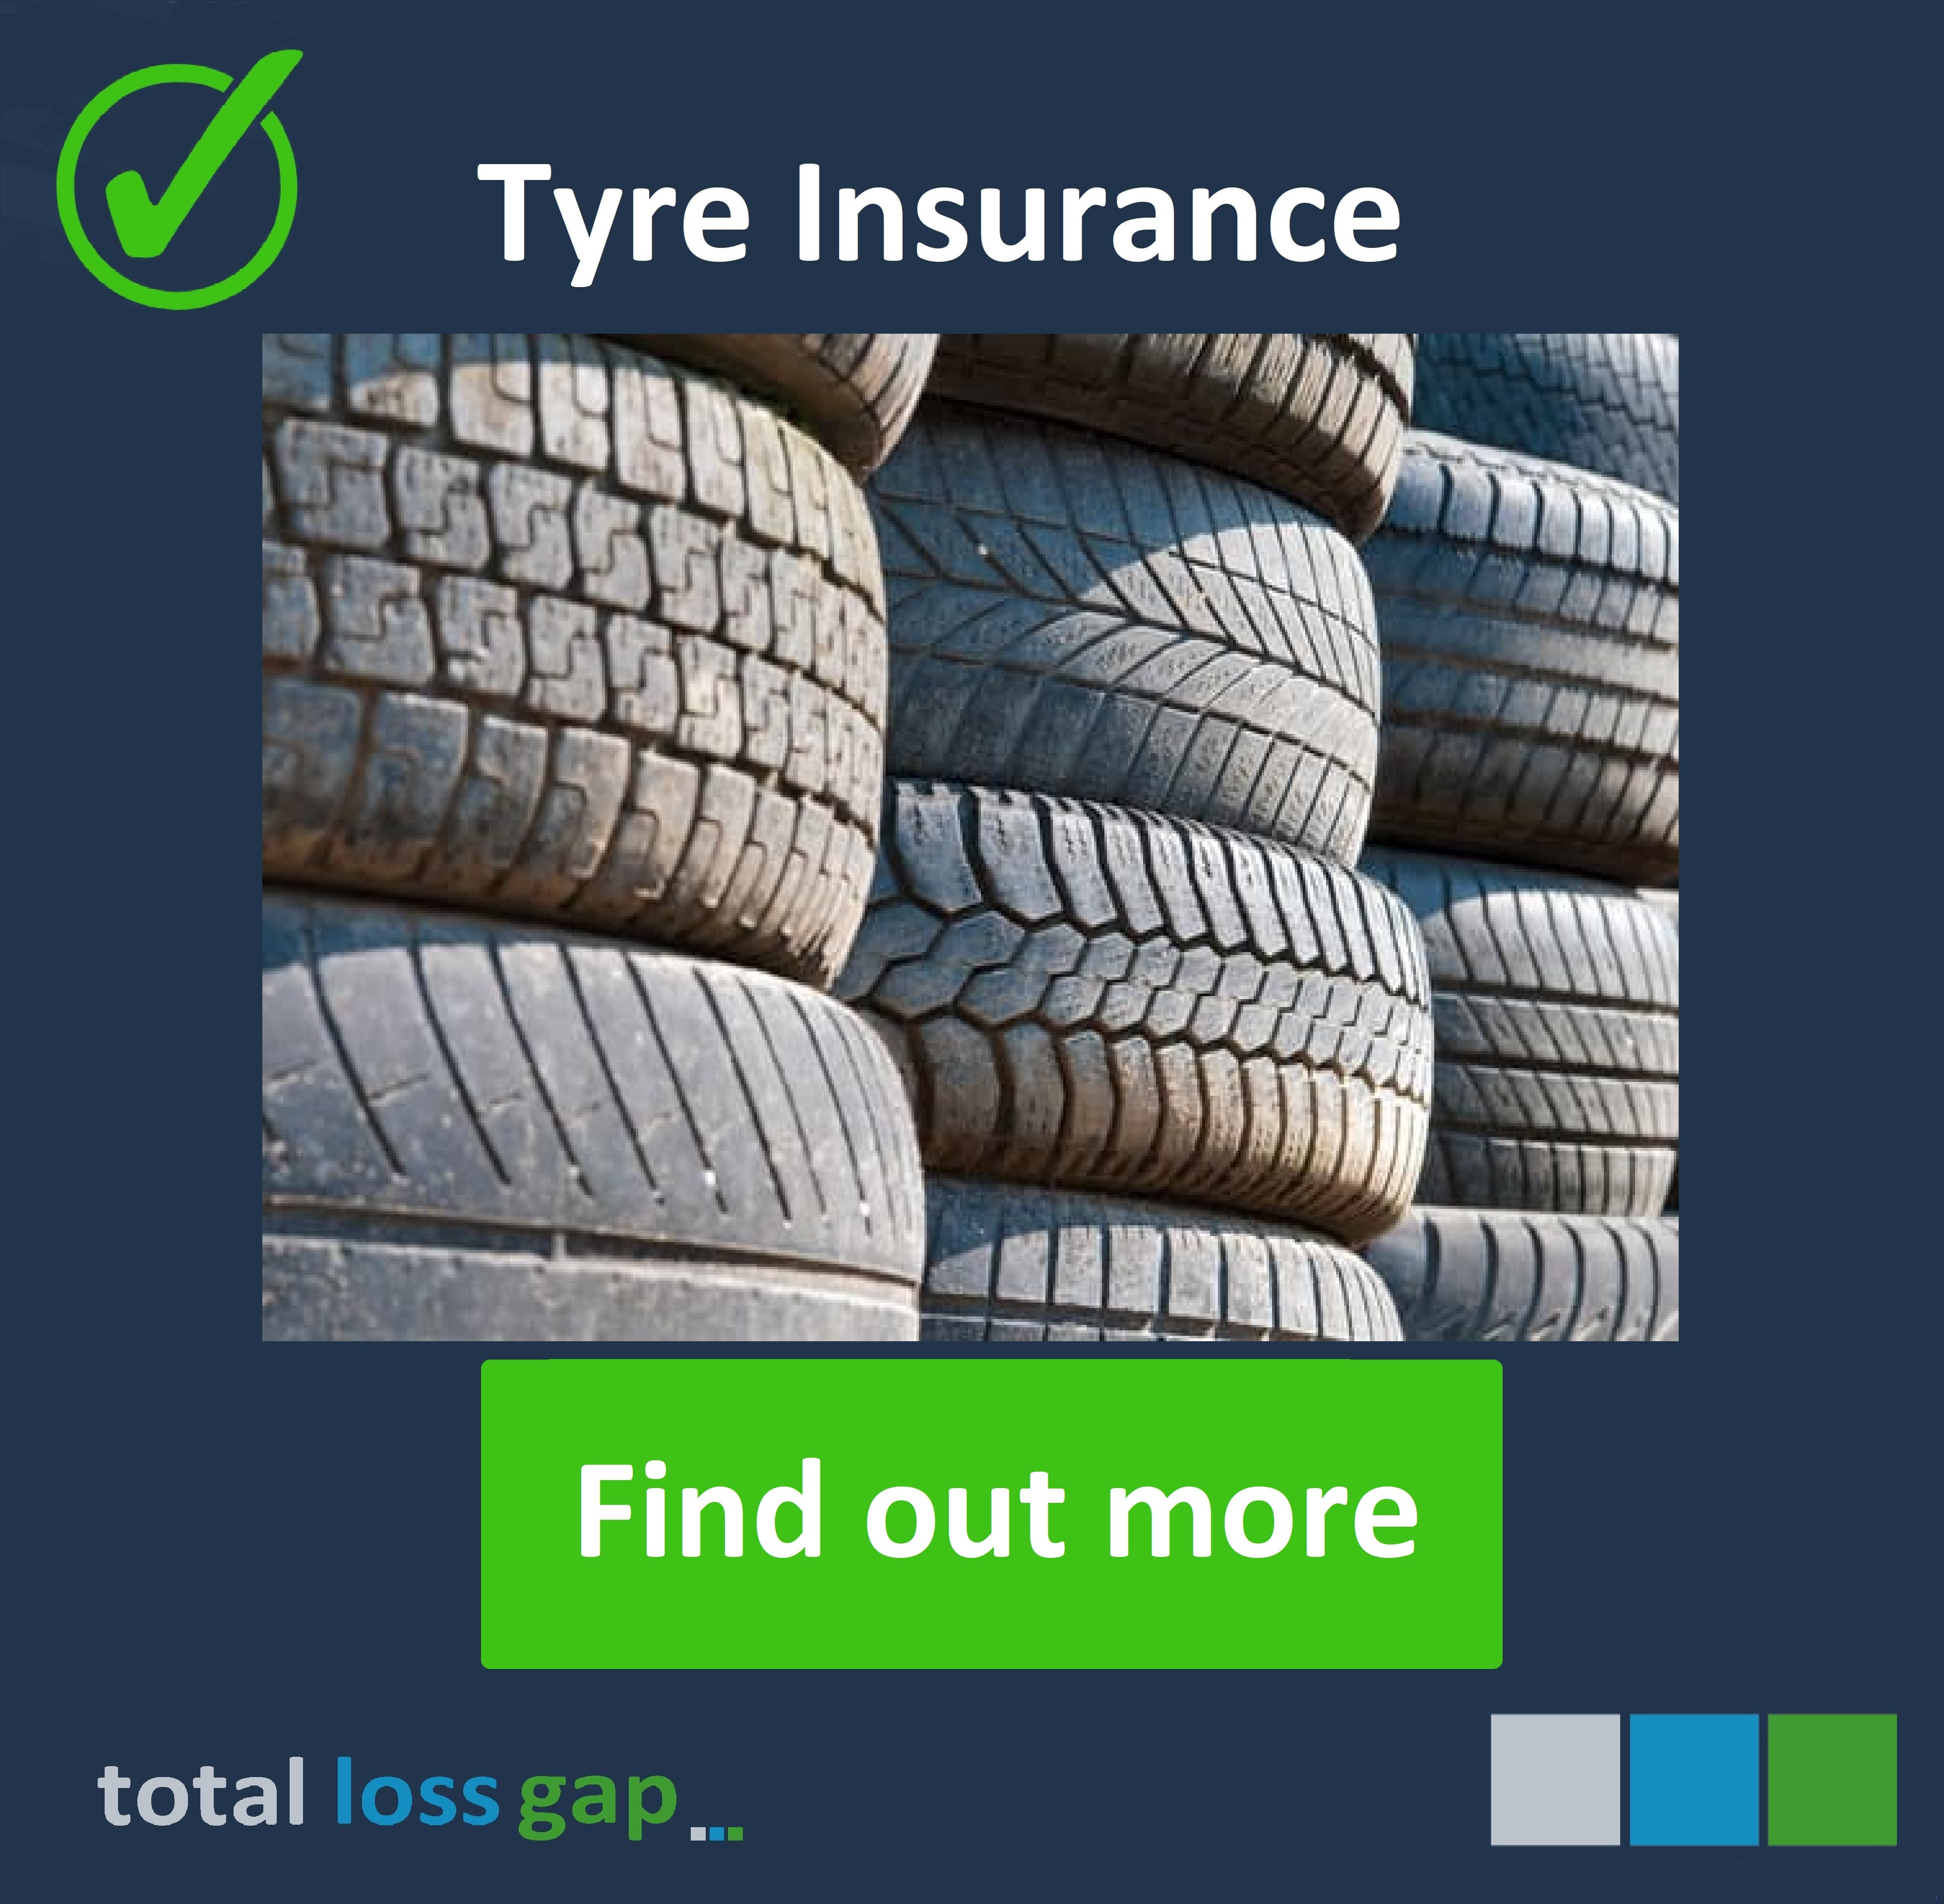 Find out more about Tyre cover